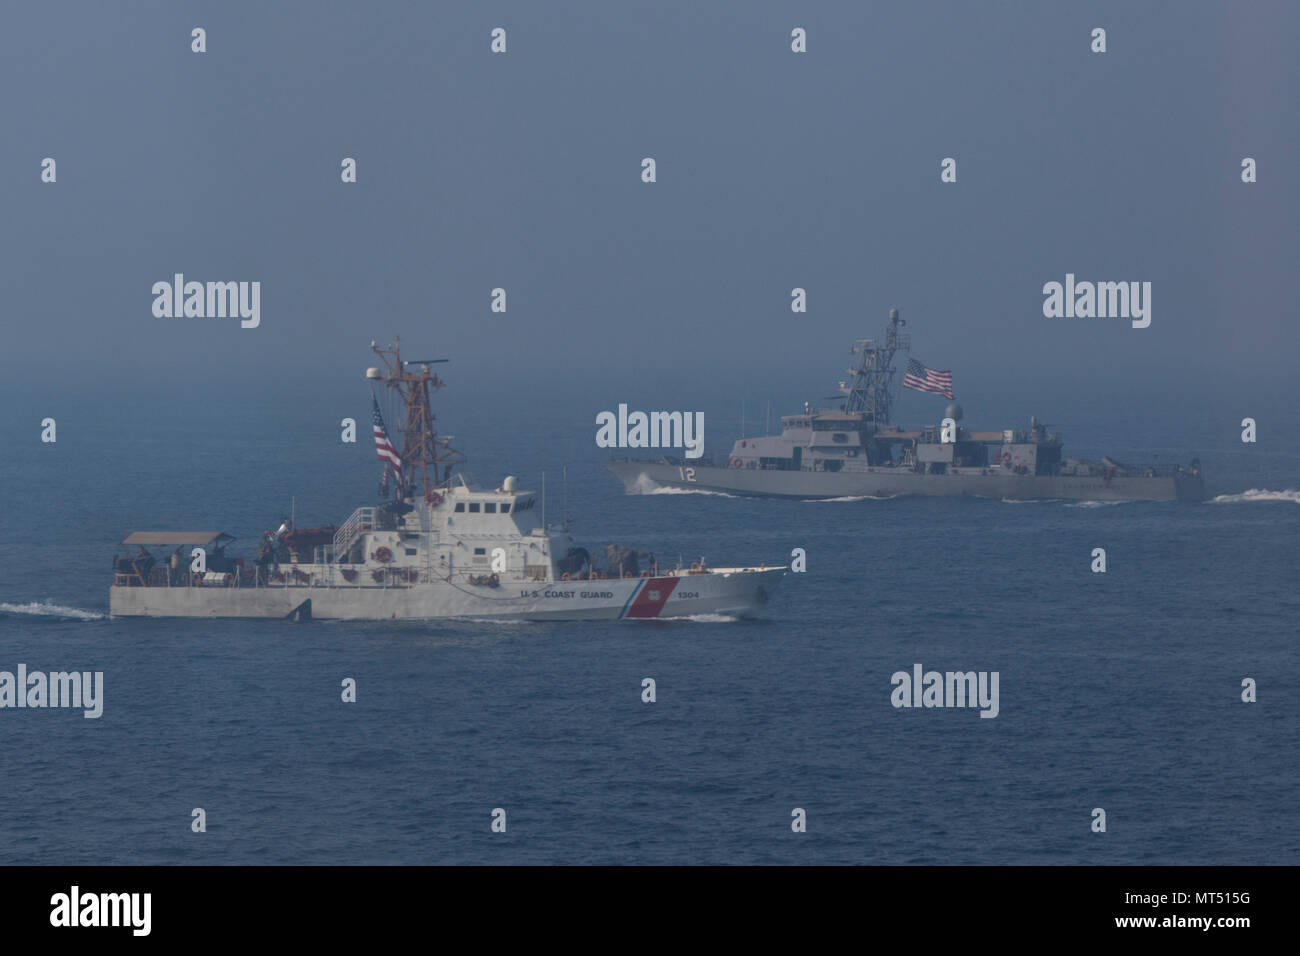 The USCGC “Maui” (WPB-1304), a U.S. Coast Guard Island-class Cutter, left, and the USS “Thunderbolt“ (PC-12), a U.S. Navy Cyclone-class patrol (coastal) ship, right, sail during a trilateral exercise in the Arabian Gulf, on July 25, 2017. The trilateral exercise, hosted by the U.S. Navy, incorporated the U.S. Army, Navy and Coast Guard, along with the Kuwaiti and Iraqi Navy and Coast Guard, in order to develop the skills and relations of the Coalition forces to work together in support of regional stability. (U.S. Army photo by Staff Sgt. Dalton T. Smith) Stock Photo